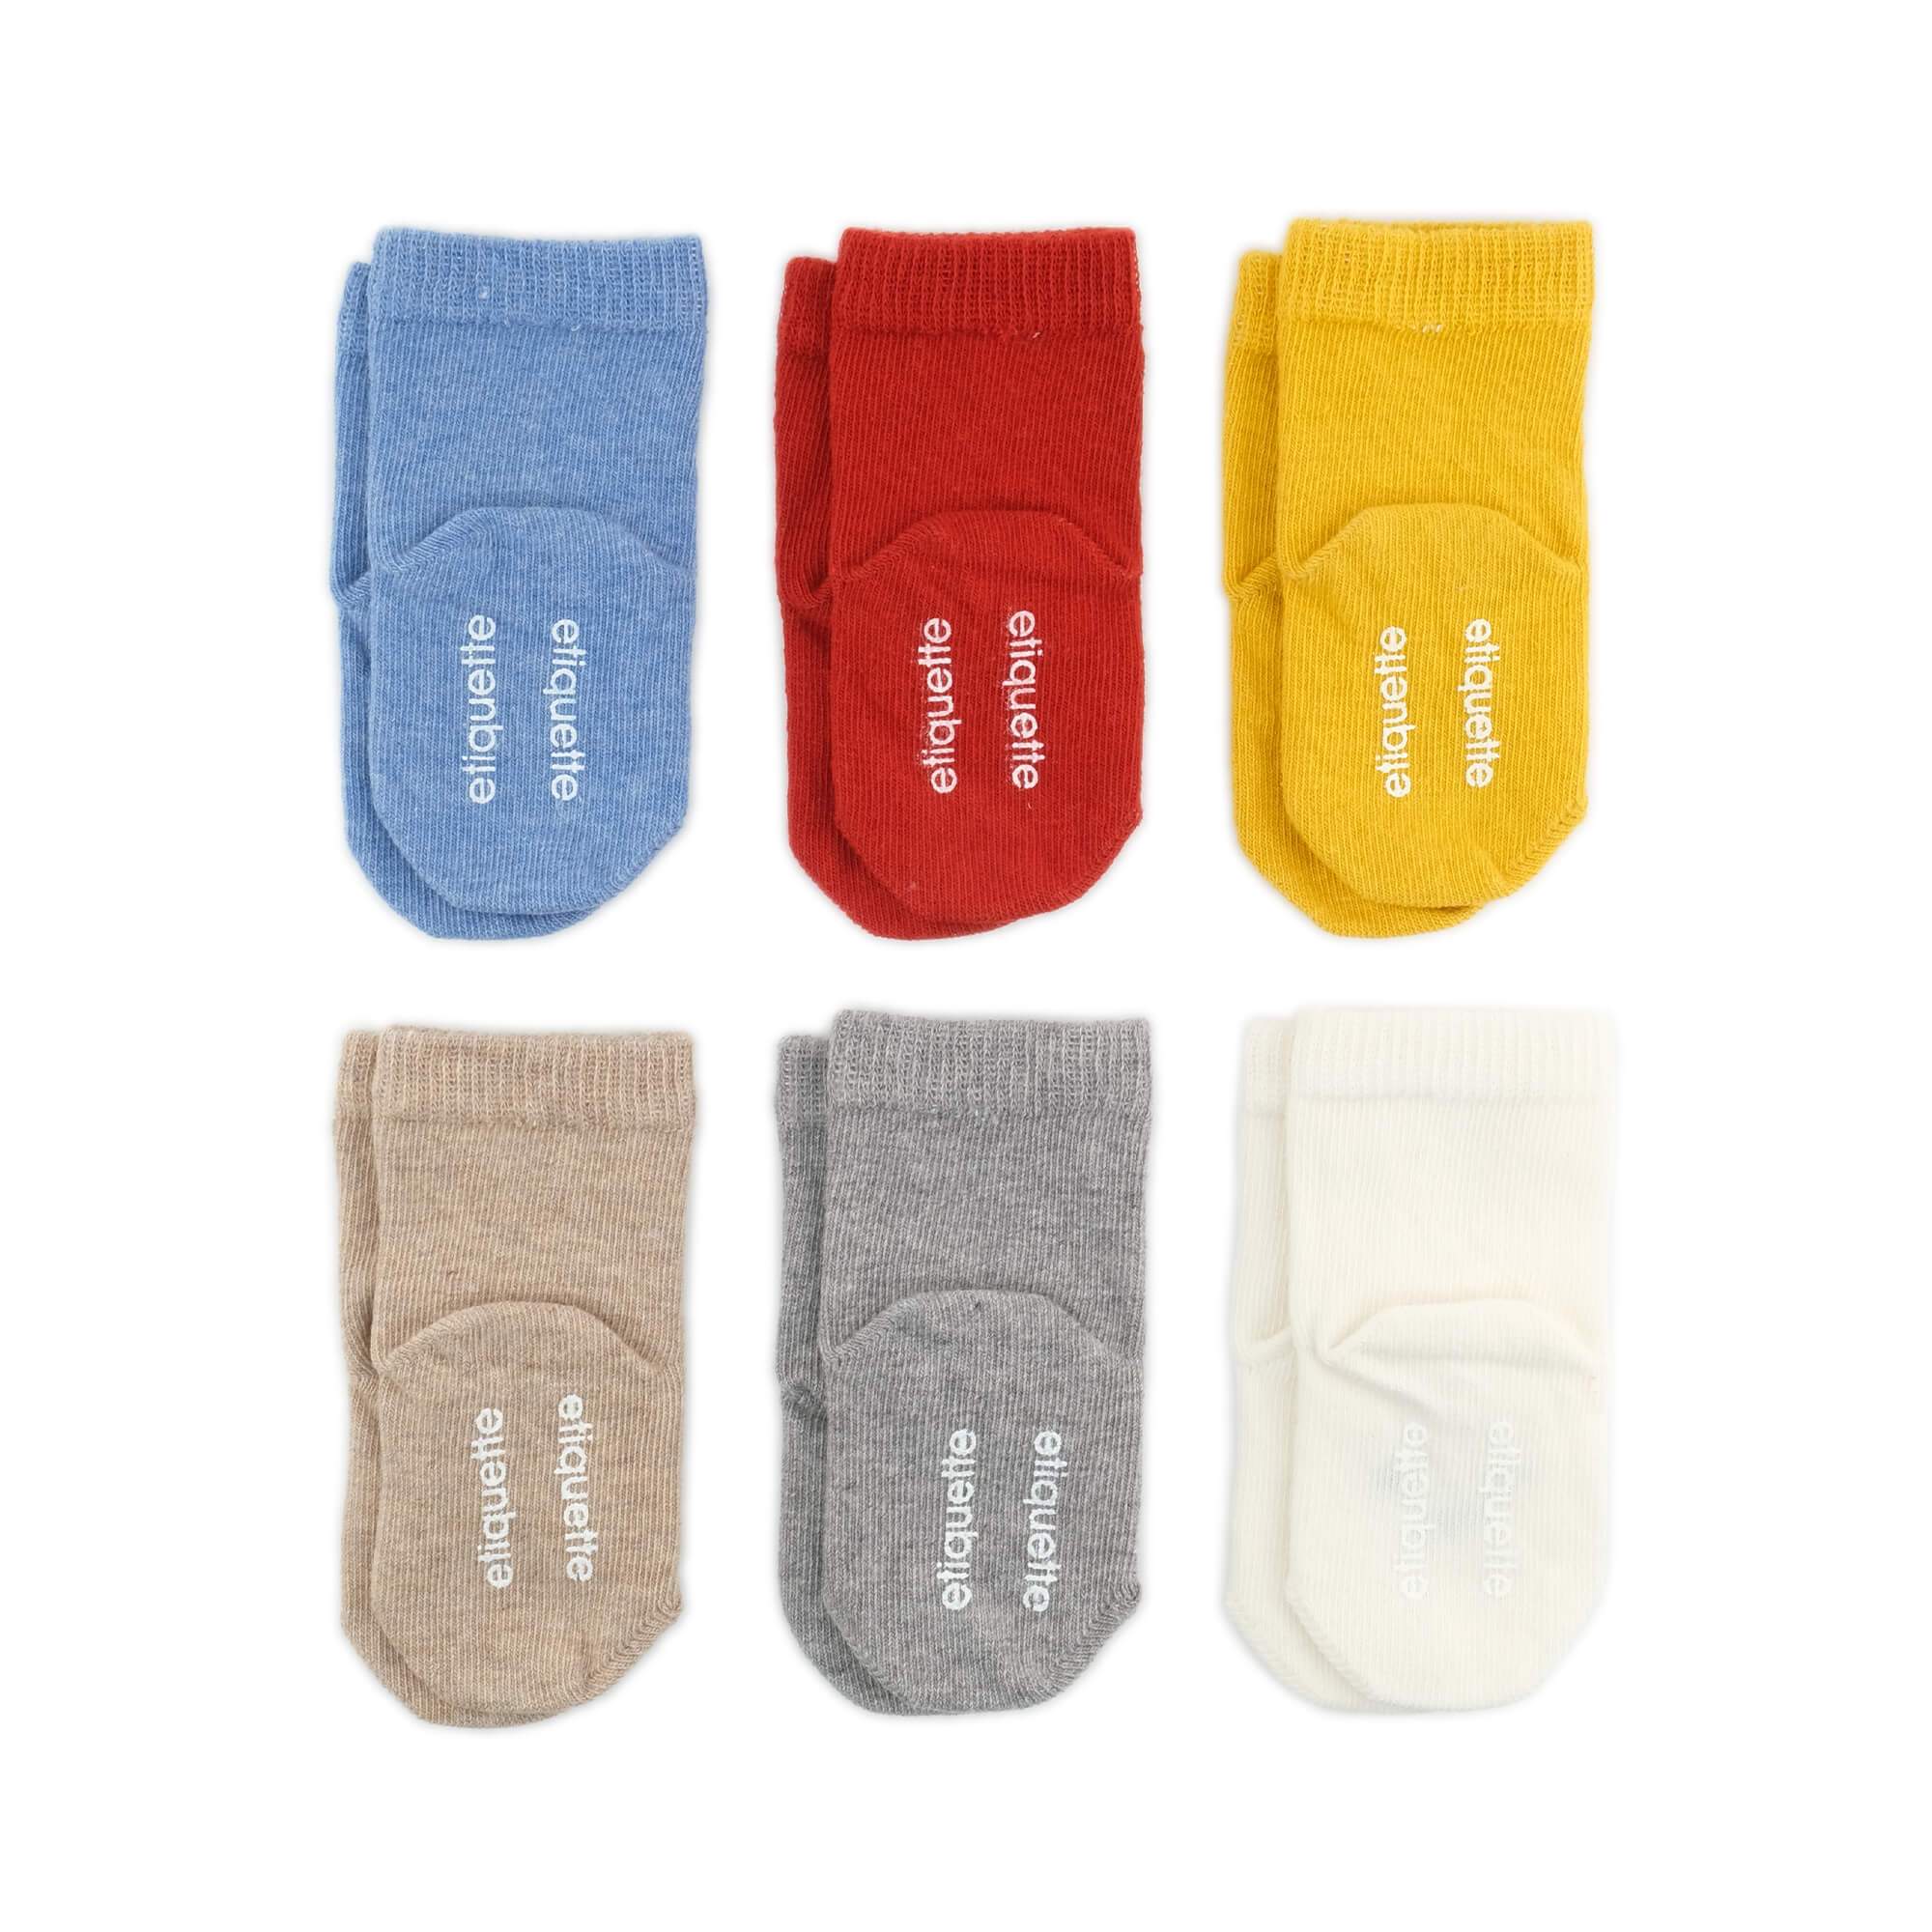 Baby Socks - Miffy x Etiquette Vintage Baby Socks Gift Box - nijntje colorful baby socks - product back view⎪Lil'Etiquette Clothiers